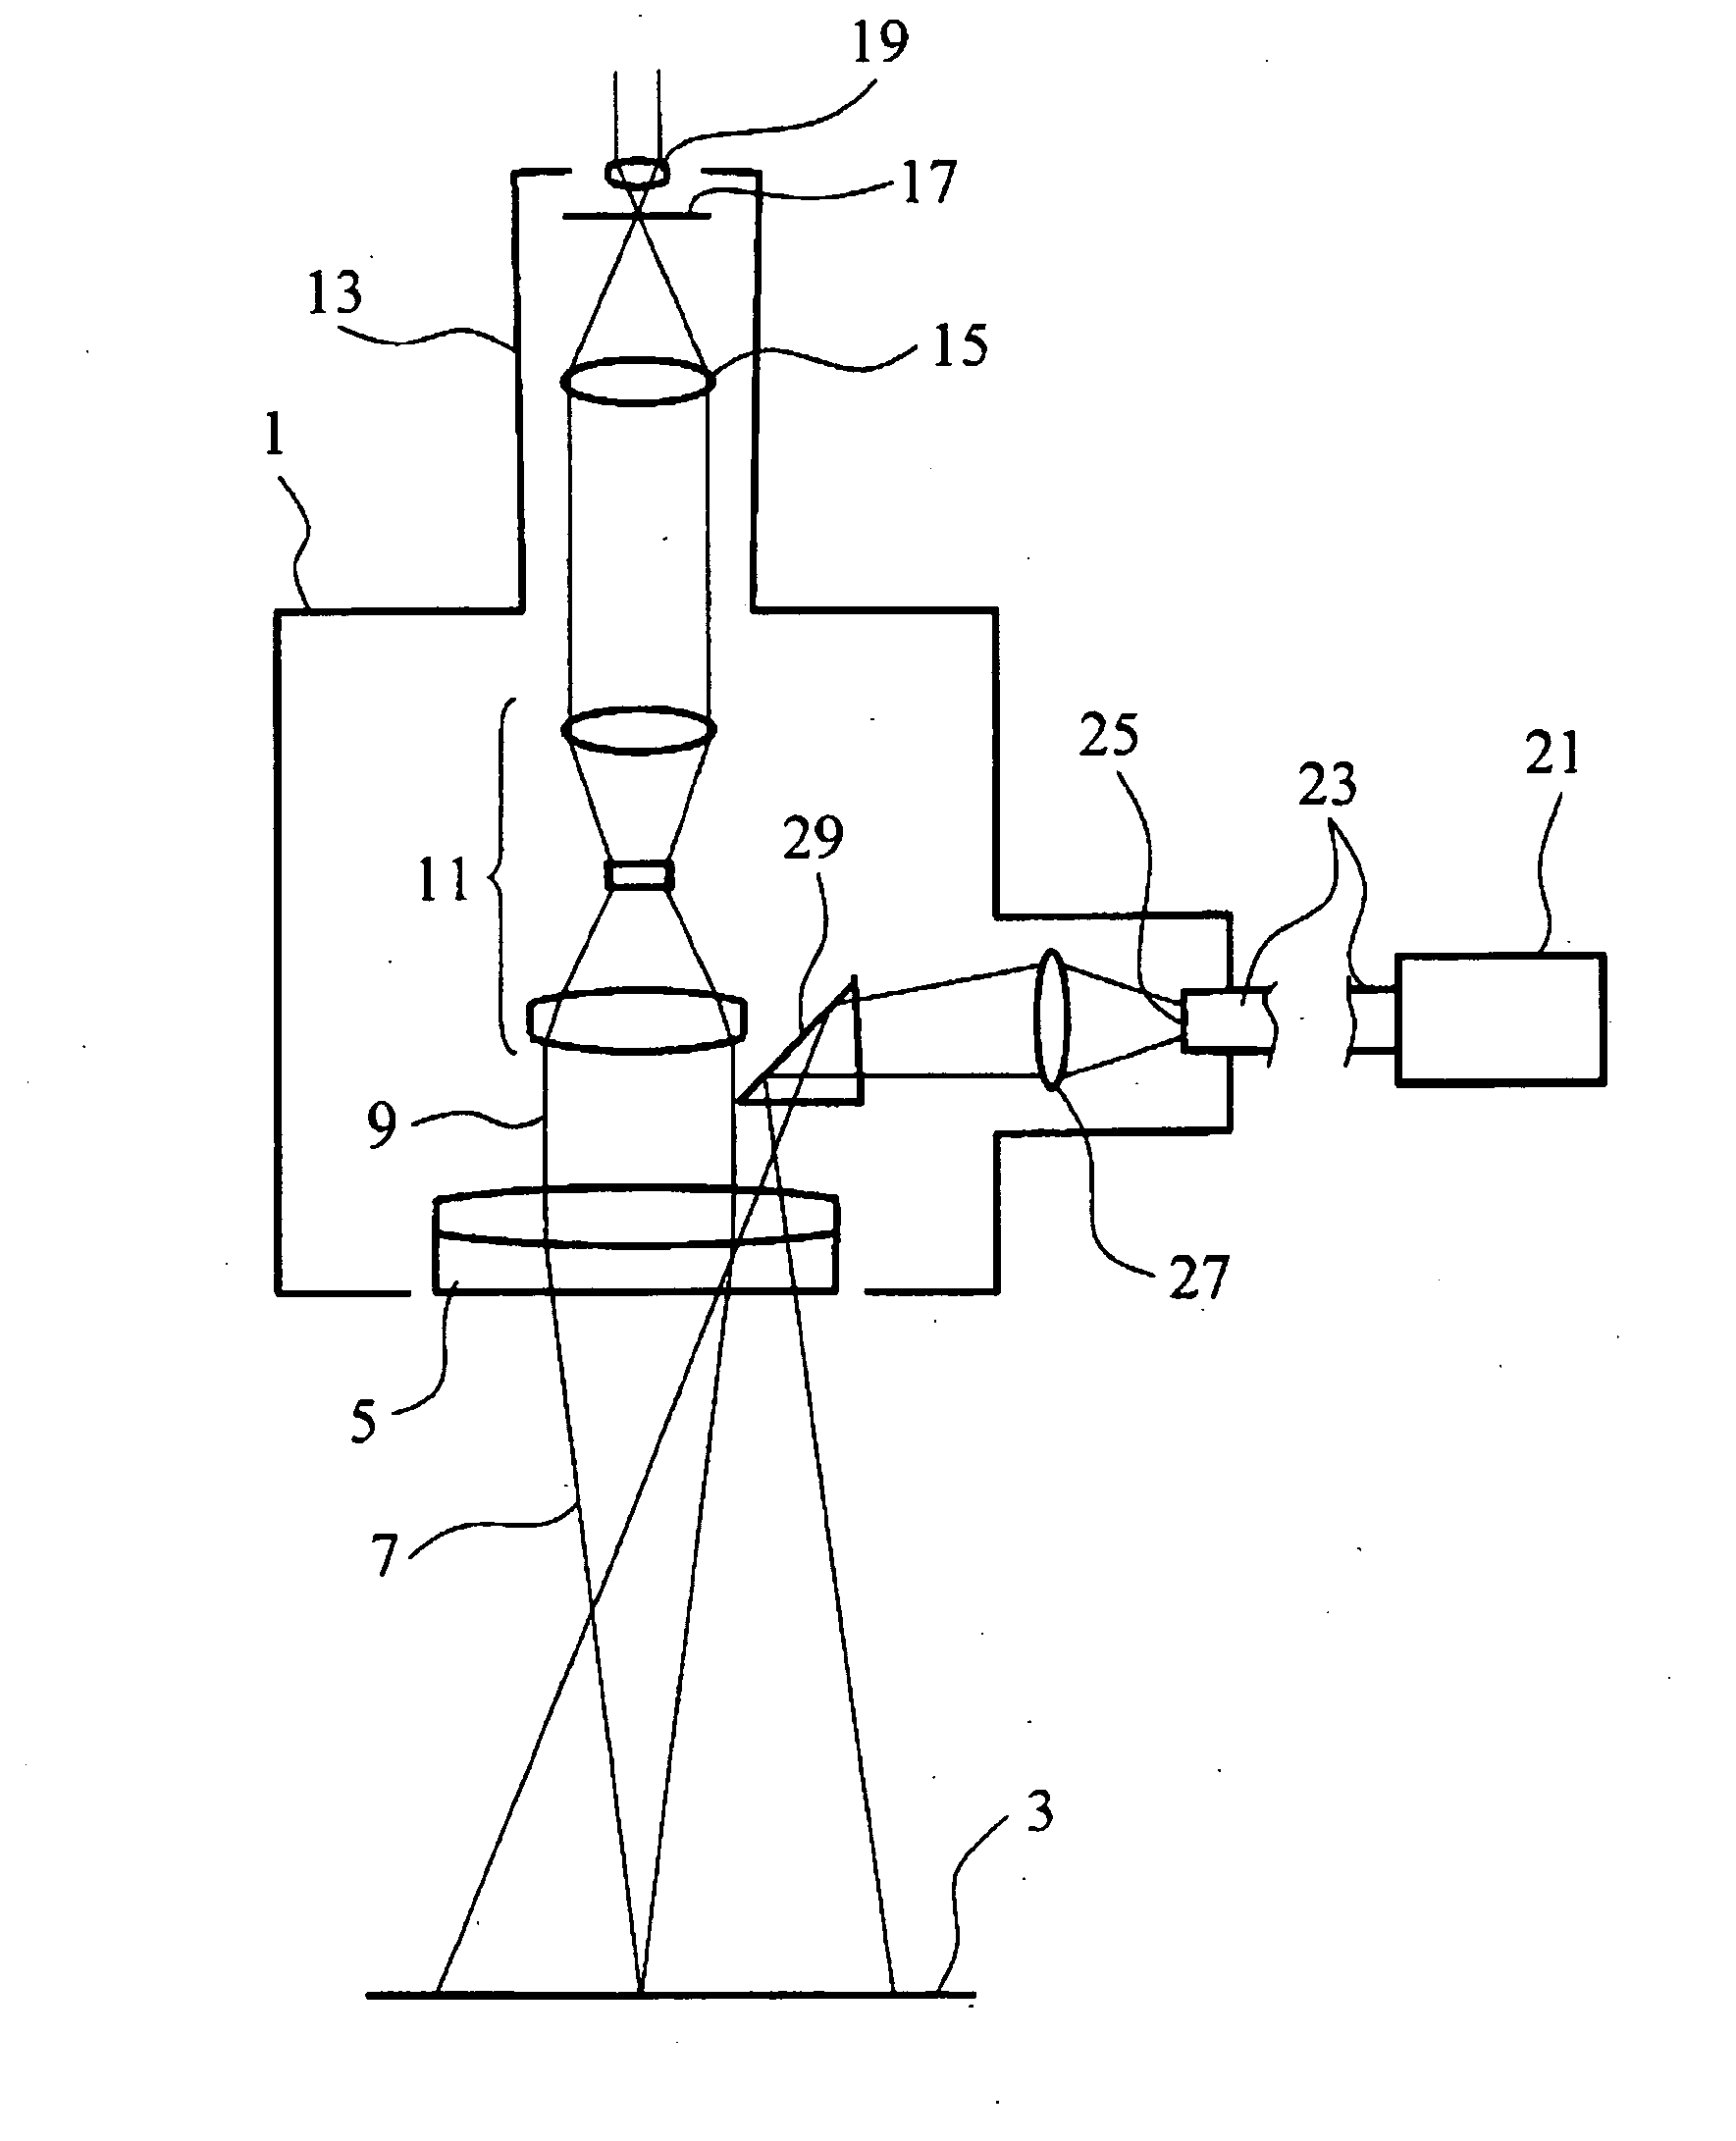 Illuminating system and an optical viewing apparatus incorporating said illuminating system